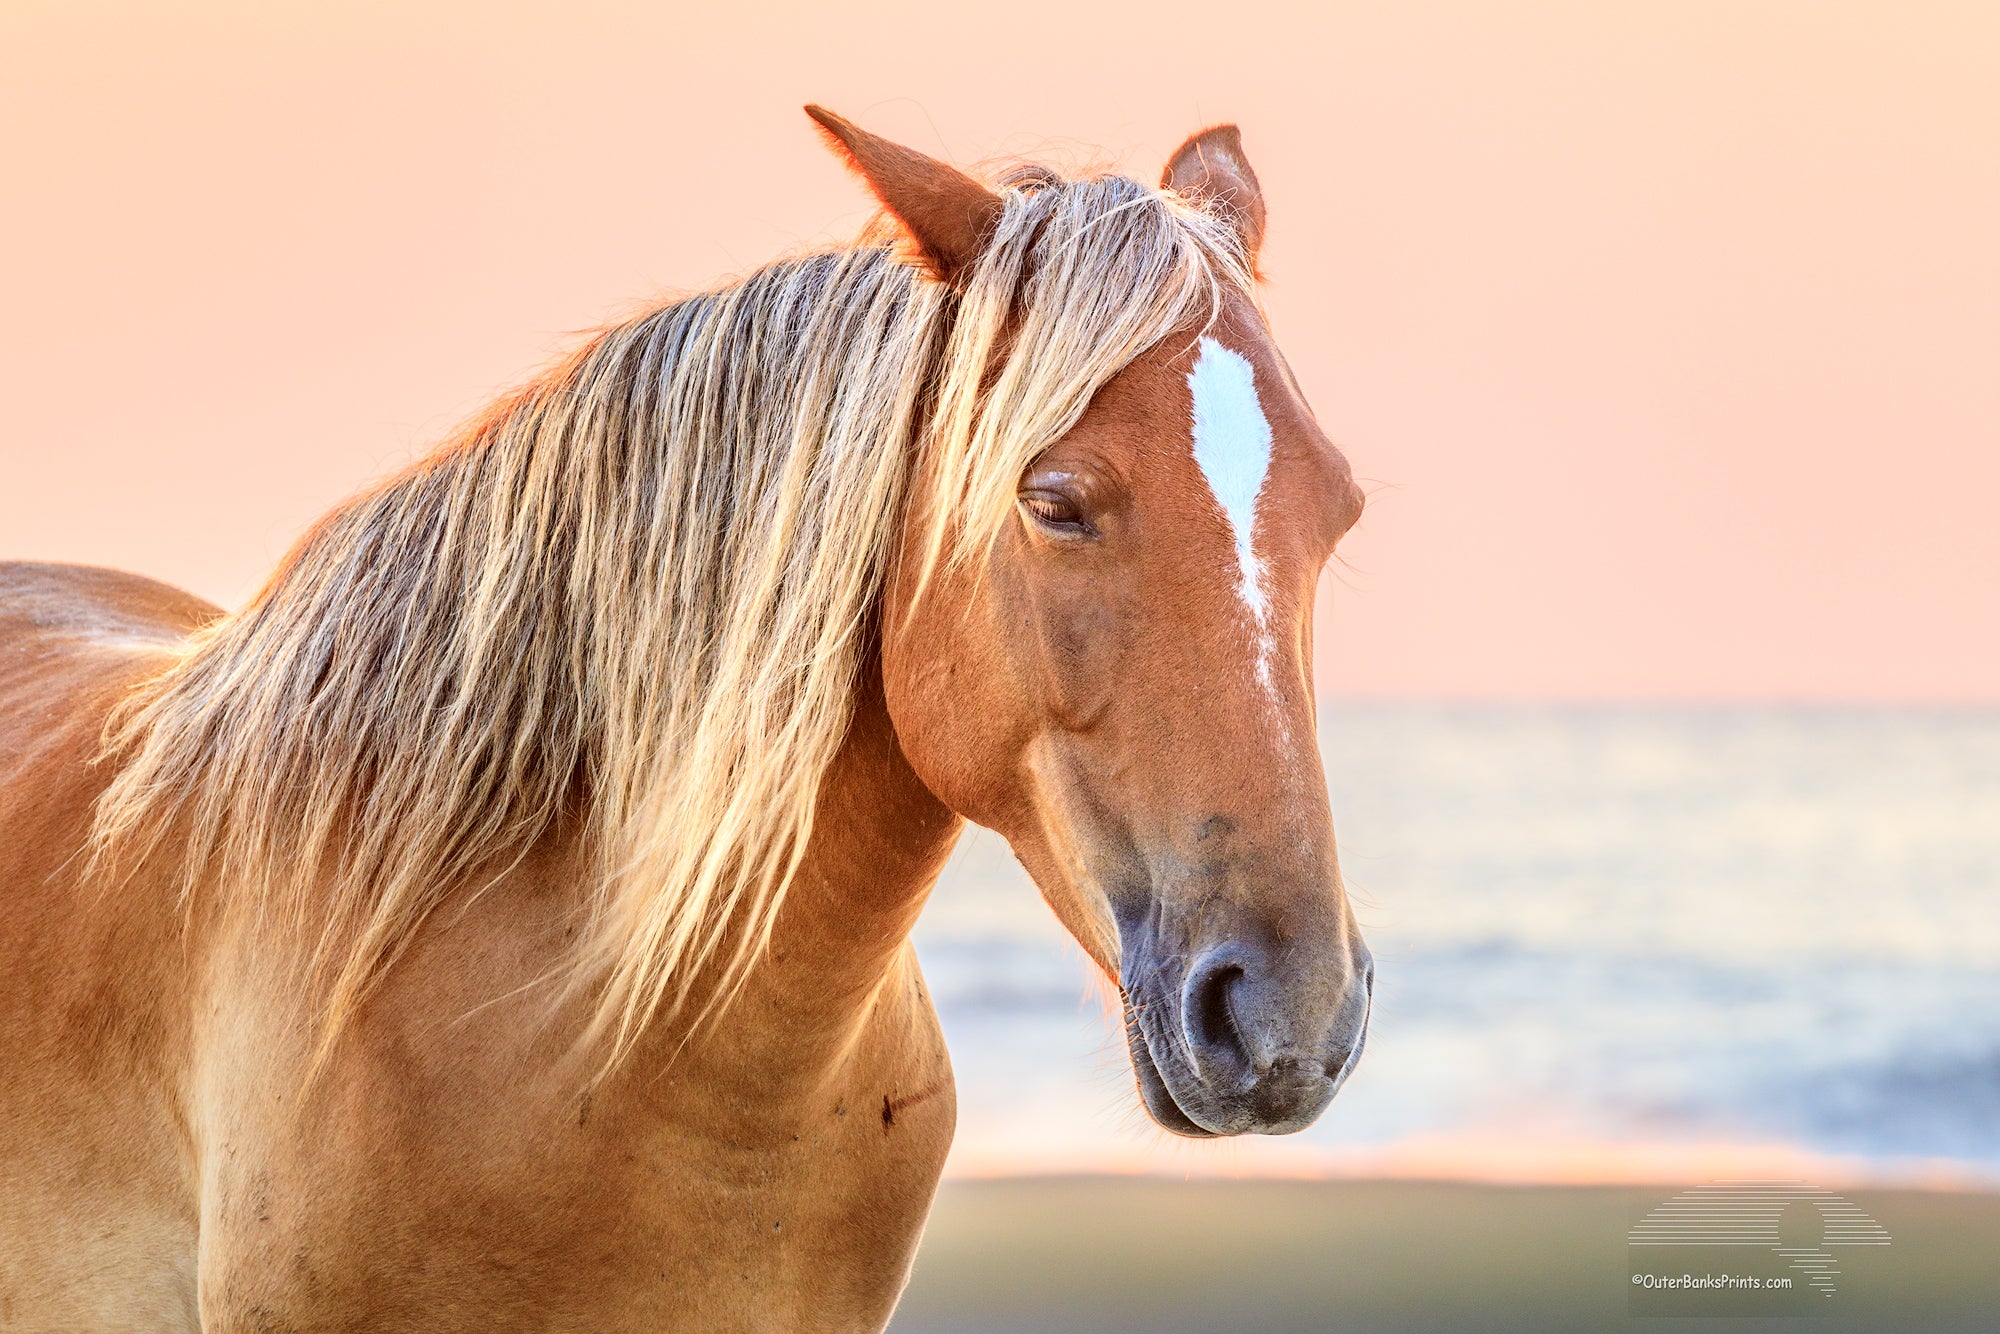 Wild horse on NC Outer Banks beach at sunrise.